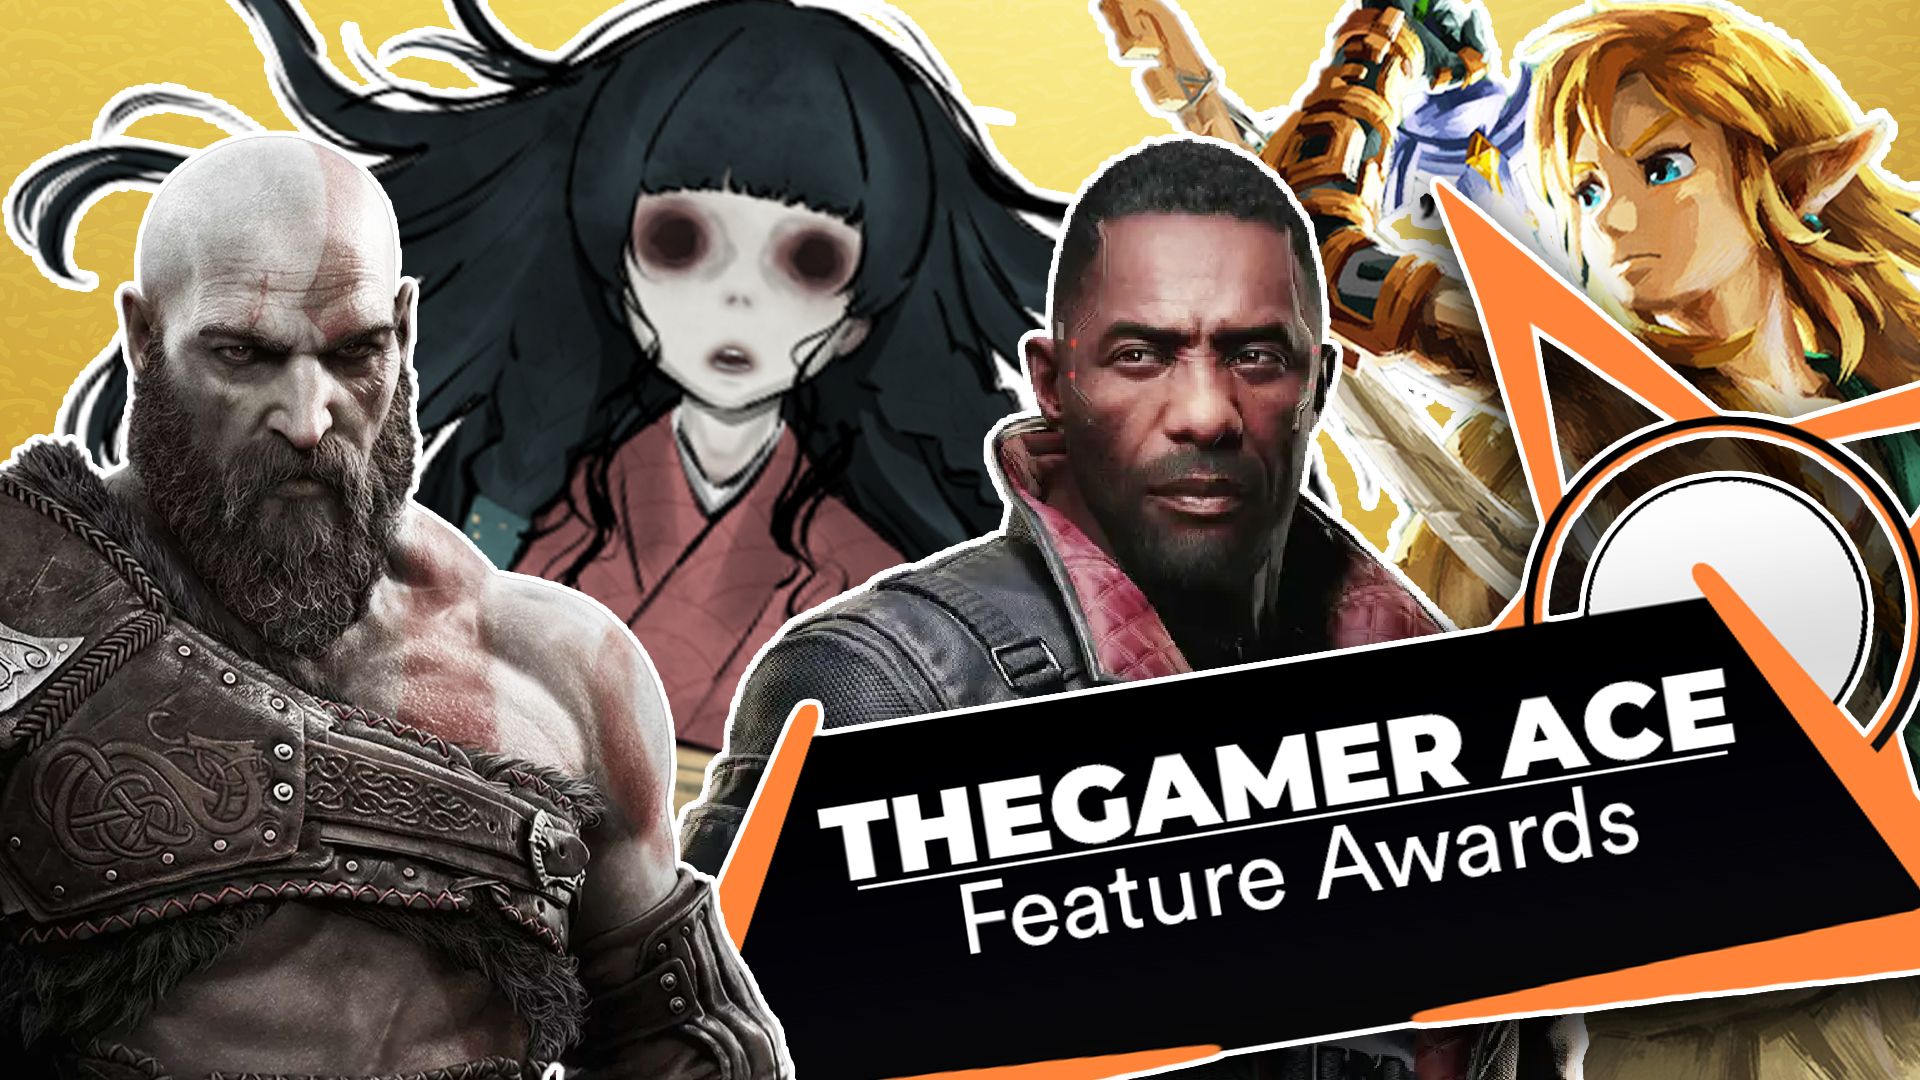 TheGamer Ace Feature Awards 